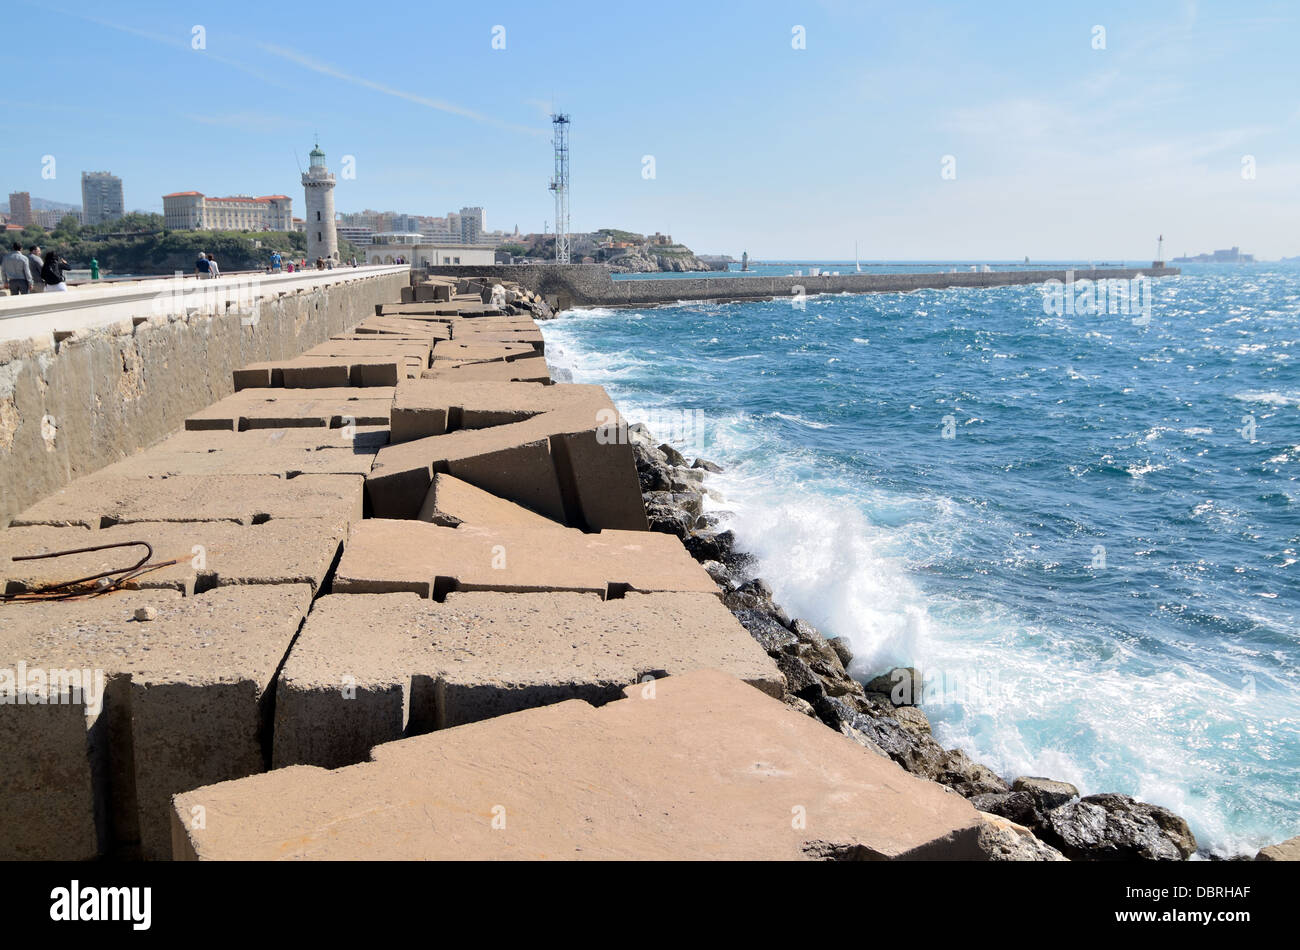 Sea Wall Defenses Breakwater or Break Water Protecting Marseille Port Harbor Harbour or Docks Marseille Provence France Stock Photo